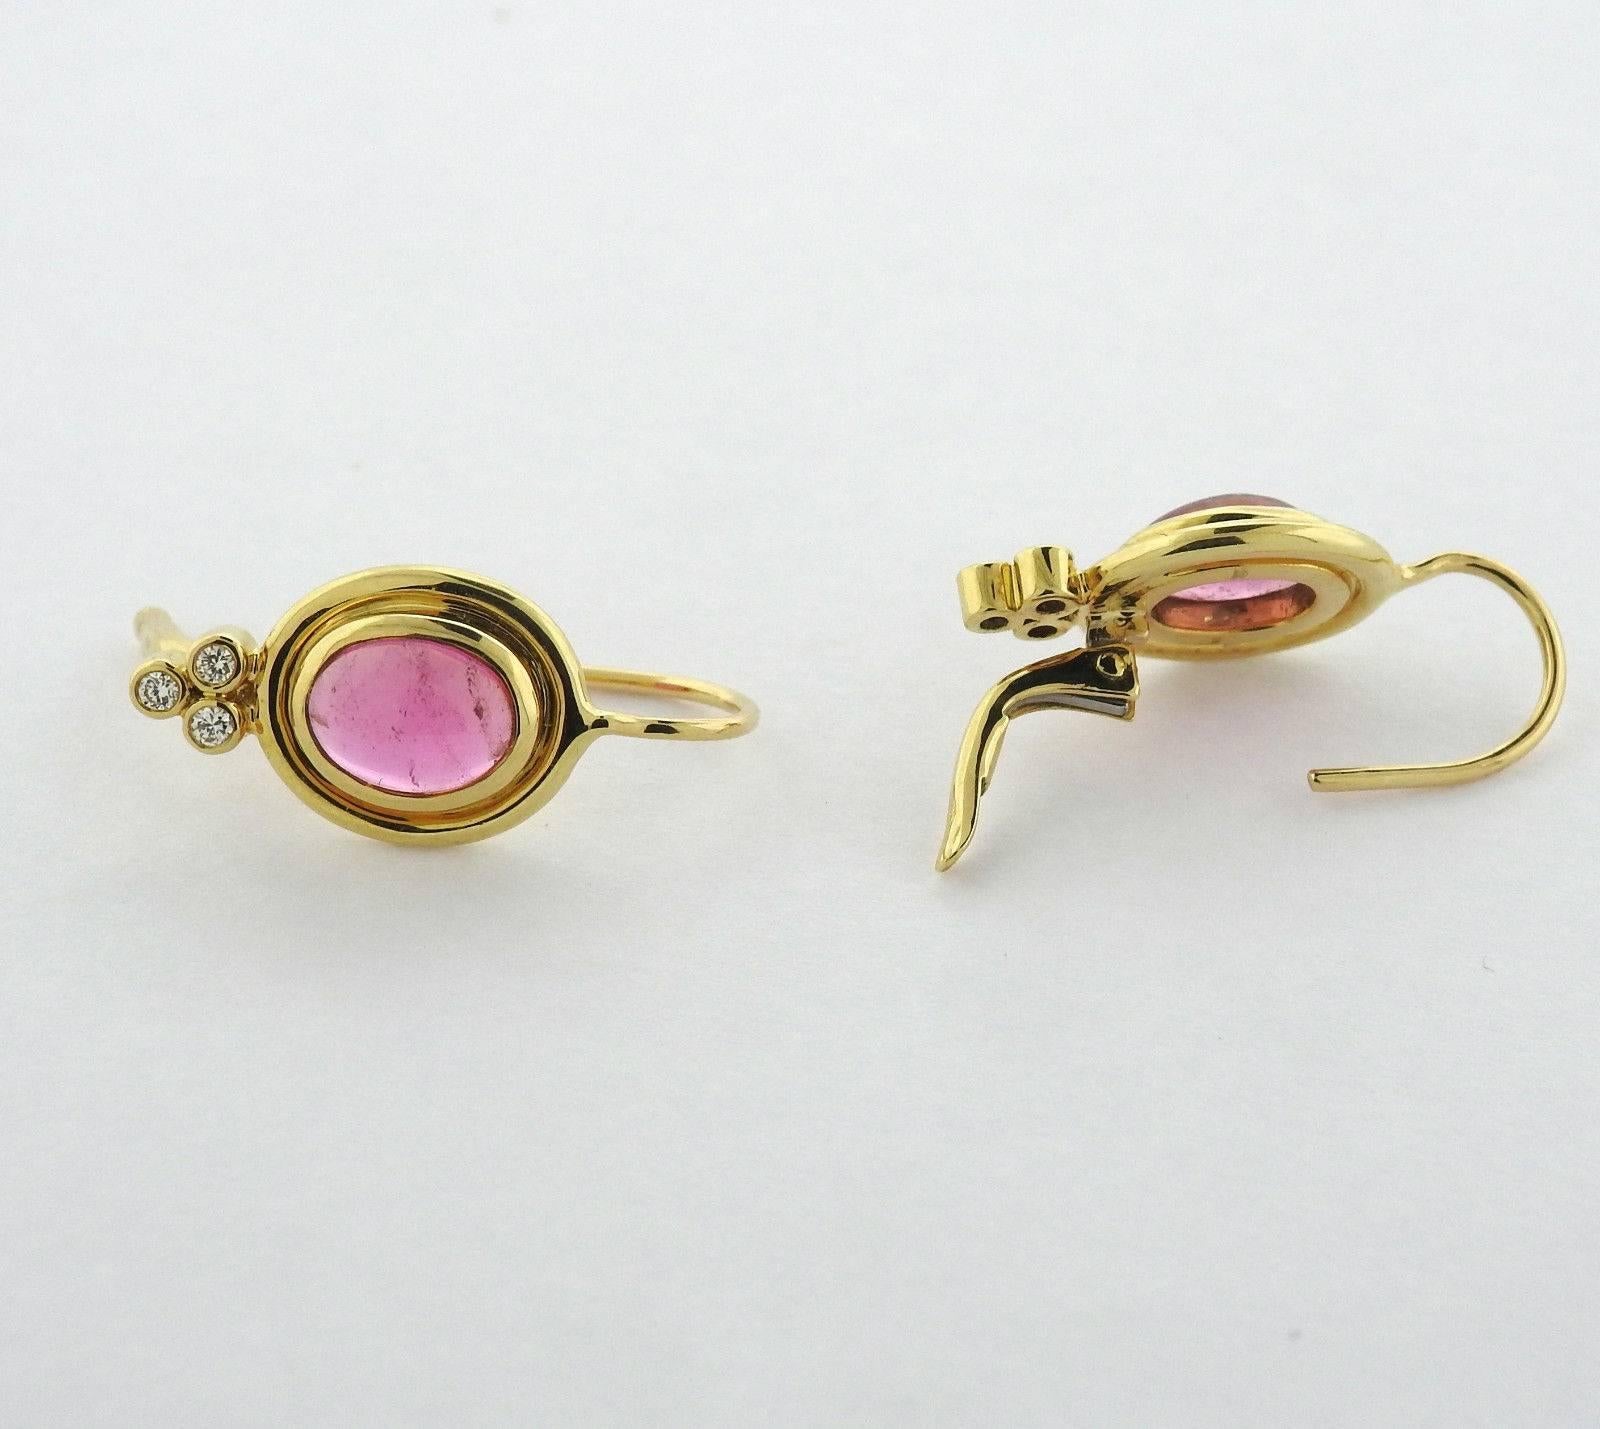 A pair of 18k yellow gold earrings set with pink tourmaline cabochons and approximately 0.09ctw of G/VS diamonds. The earrings are 22mm x 10mm and weigh 5.3 grams.  Marked with the Temple mark and 750.  The earrings currently retail for $2300. 